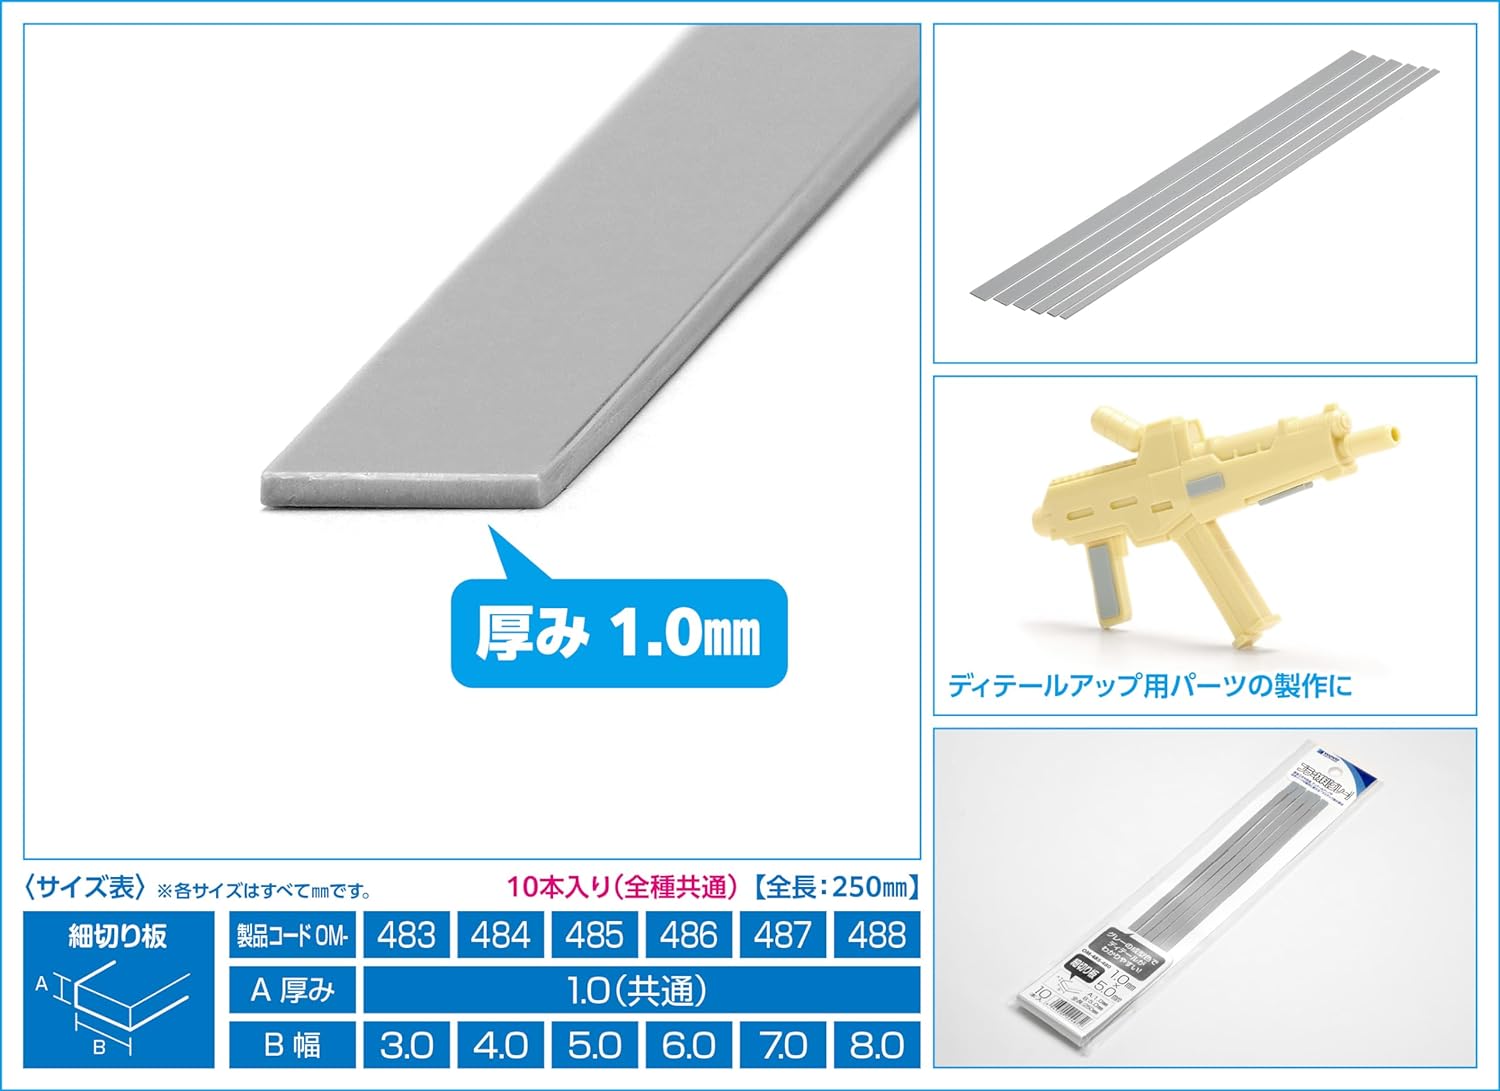 Wave OM-486 Material Series Plastic Material Gray Shredded Board 0.04 x 0.24 inches (1.0 x 6.0 mm), 10 Pieces - BanzaiHobby